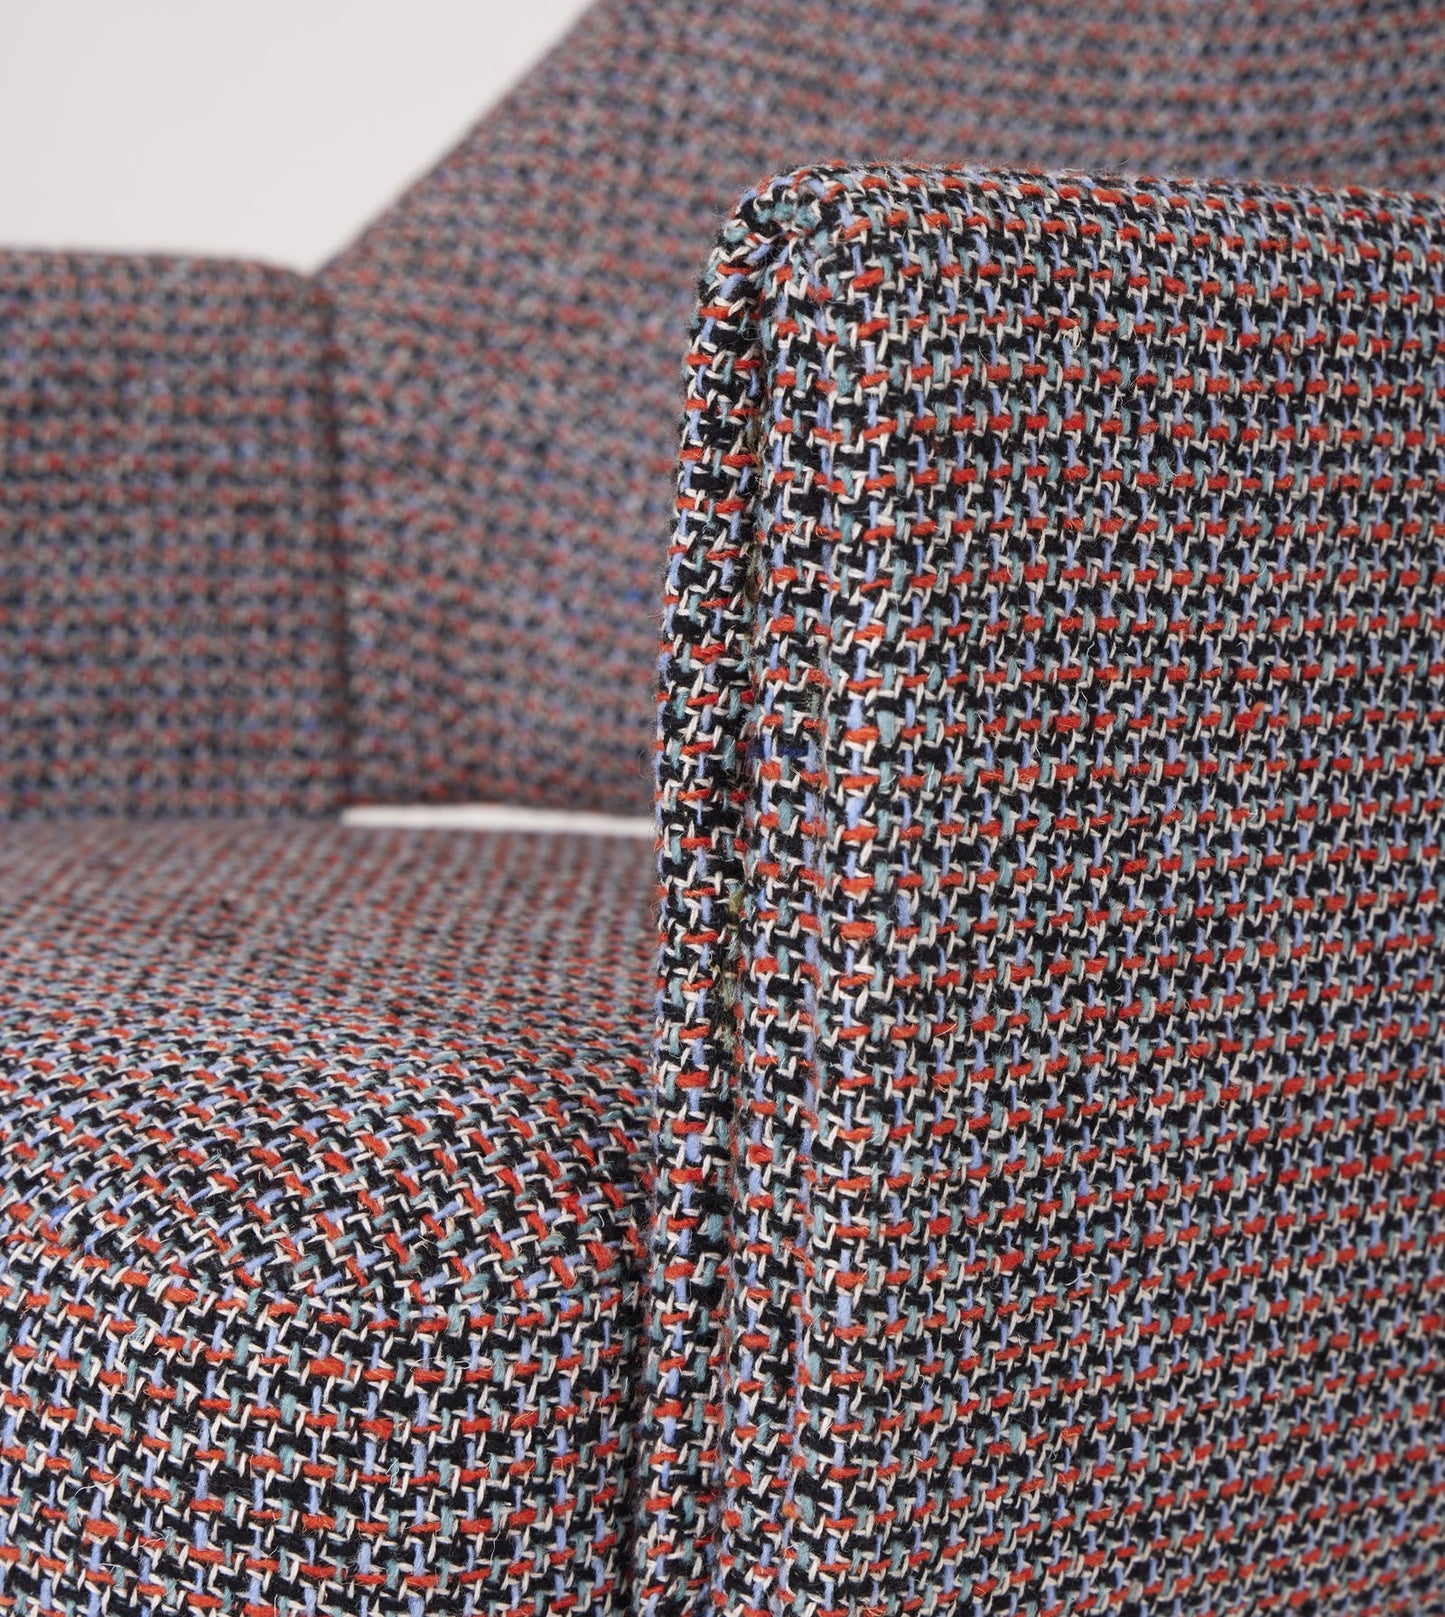 Deauville armchair for Airbone